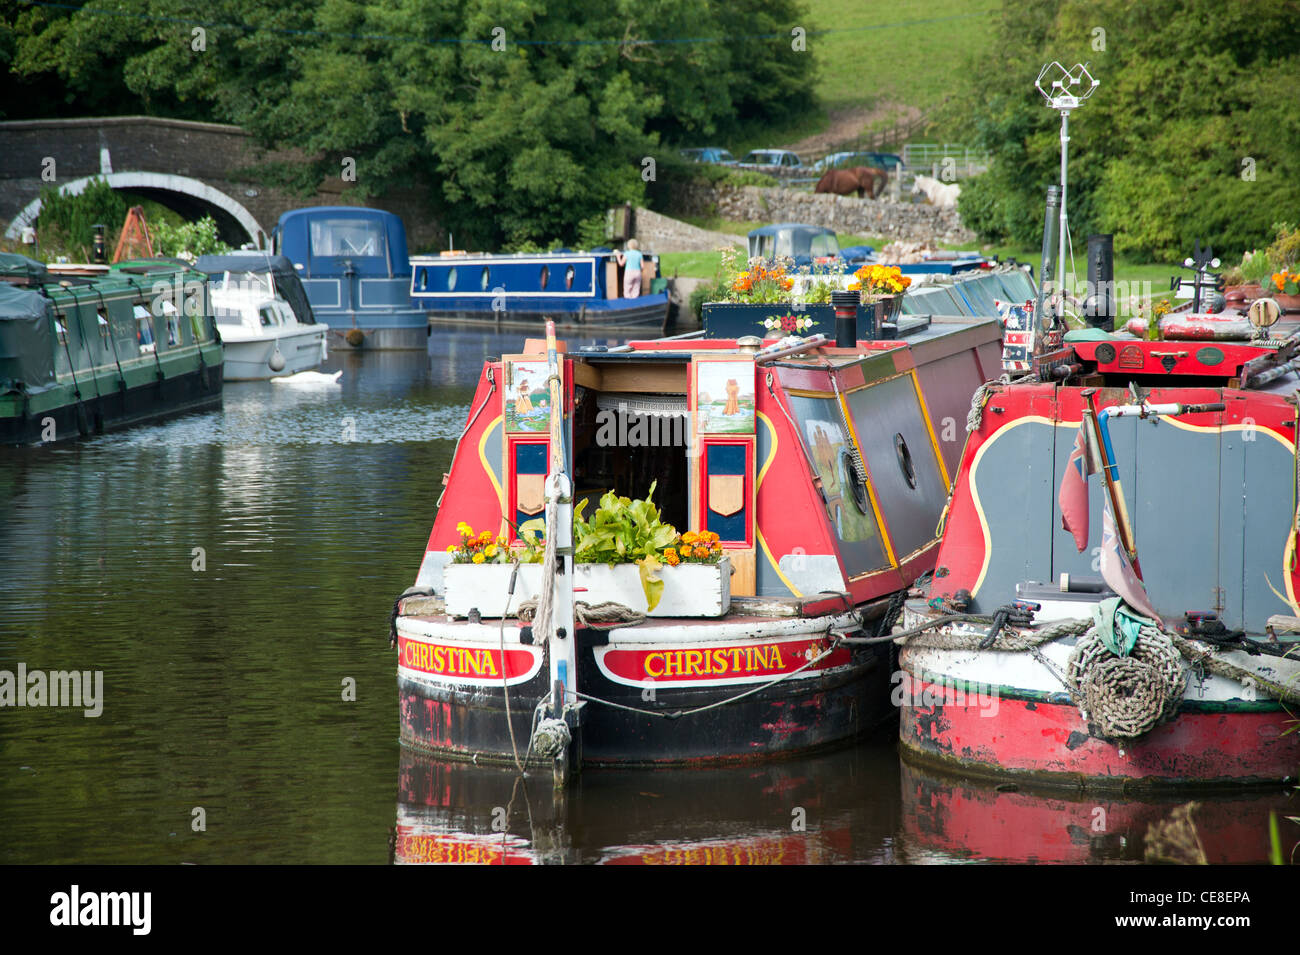 Narrowboats on the Leeds and Liverpool canal UK Stock Photo